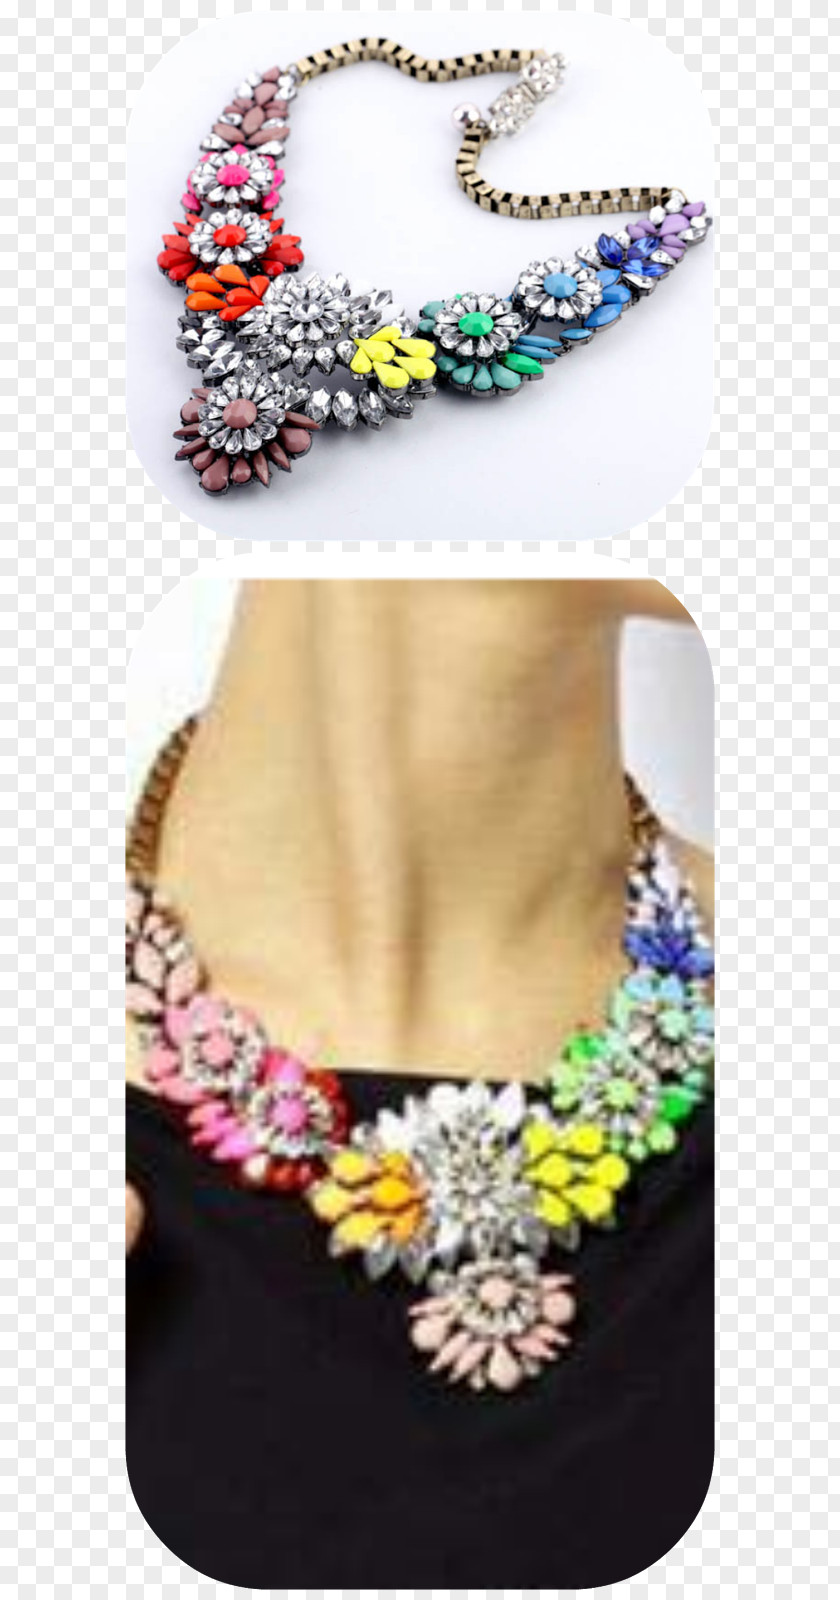 Nevada Necklace Chain PNG